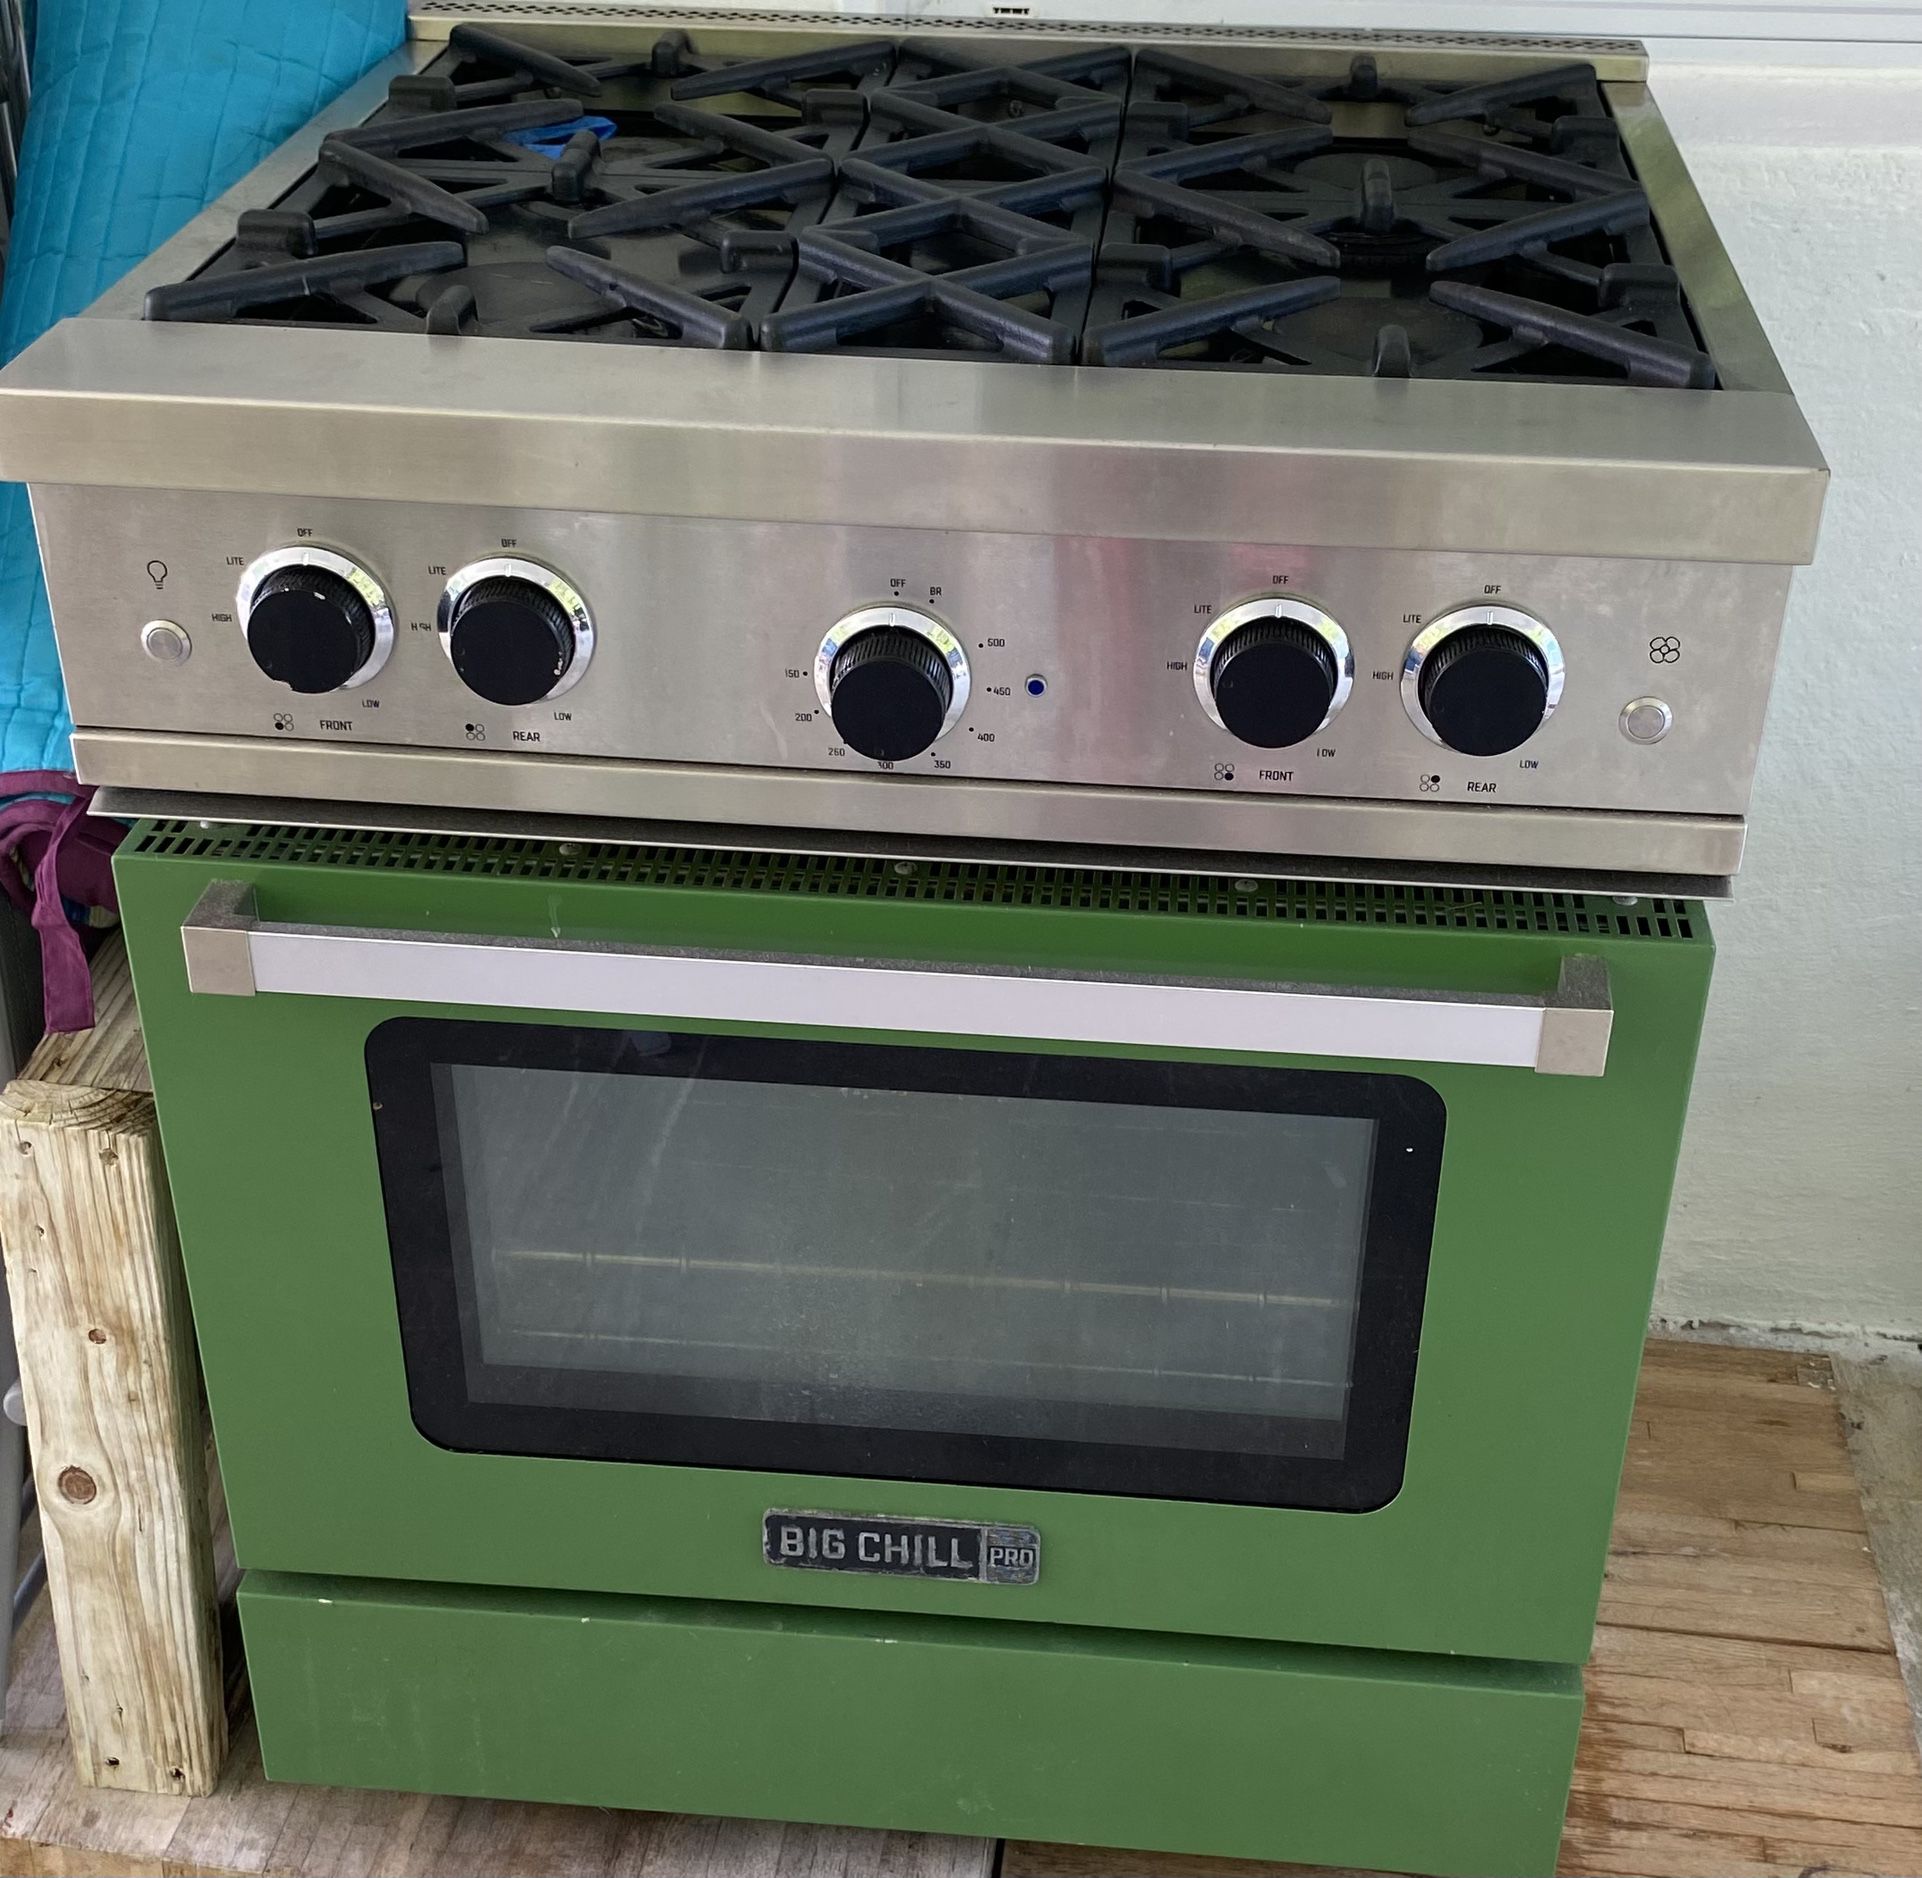 Big chill Brand Gas Stove. Great Condition. Costs $4600 New. 